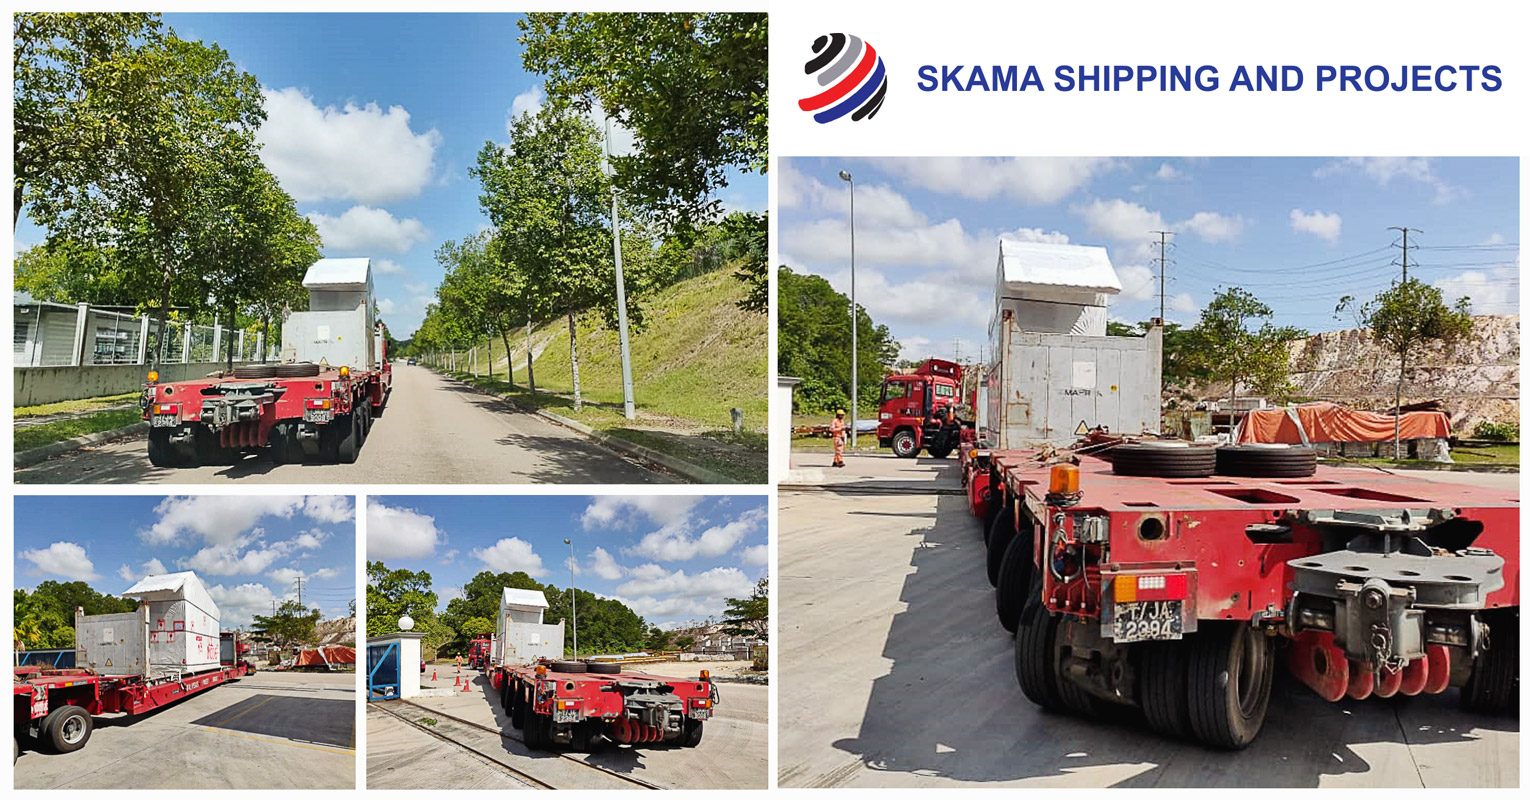 Skama Shipping and Projects Low Axle Bridge Shipment from Malaysia to New Zealand